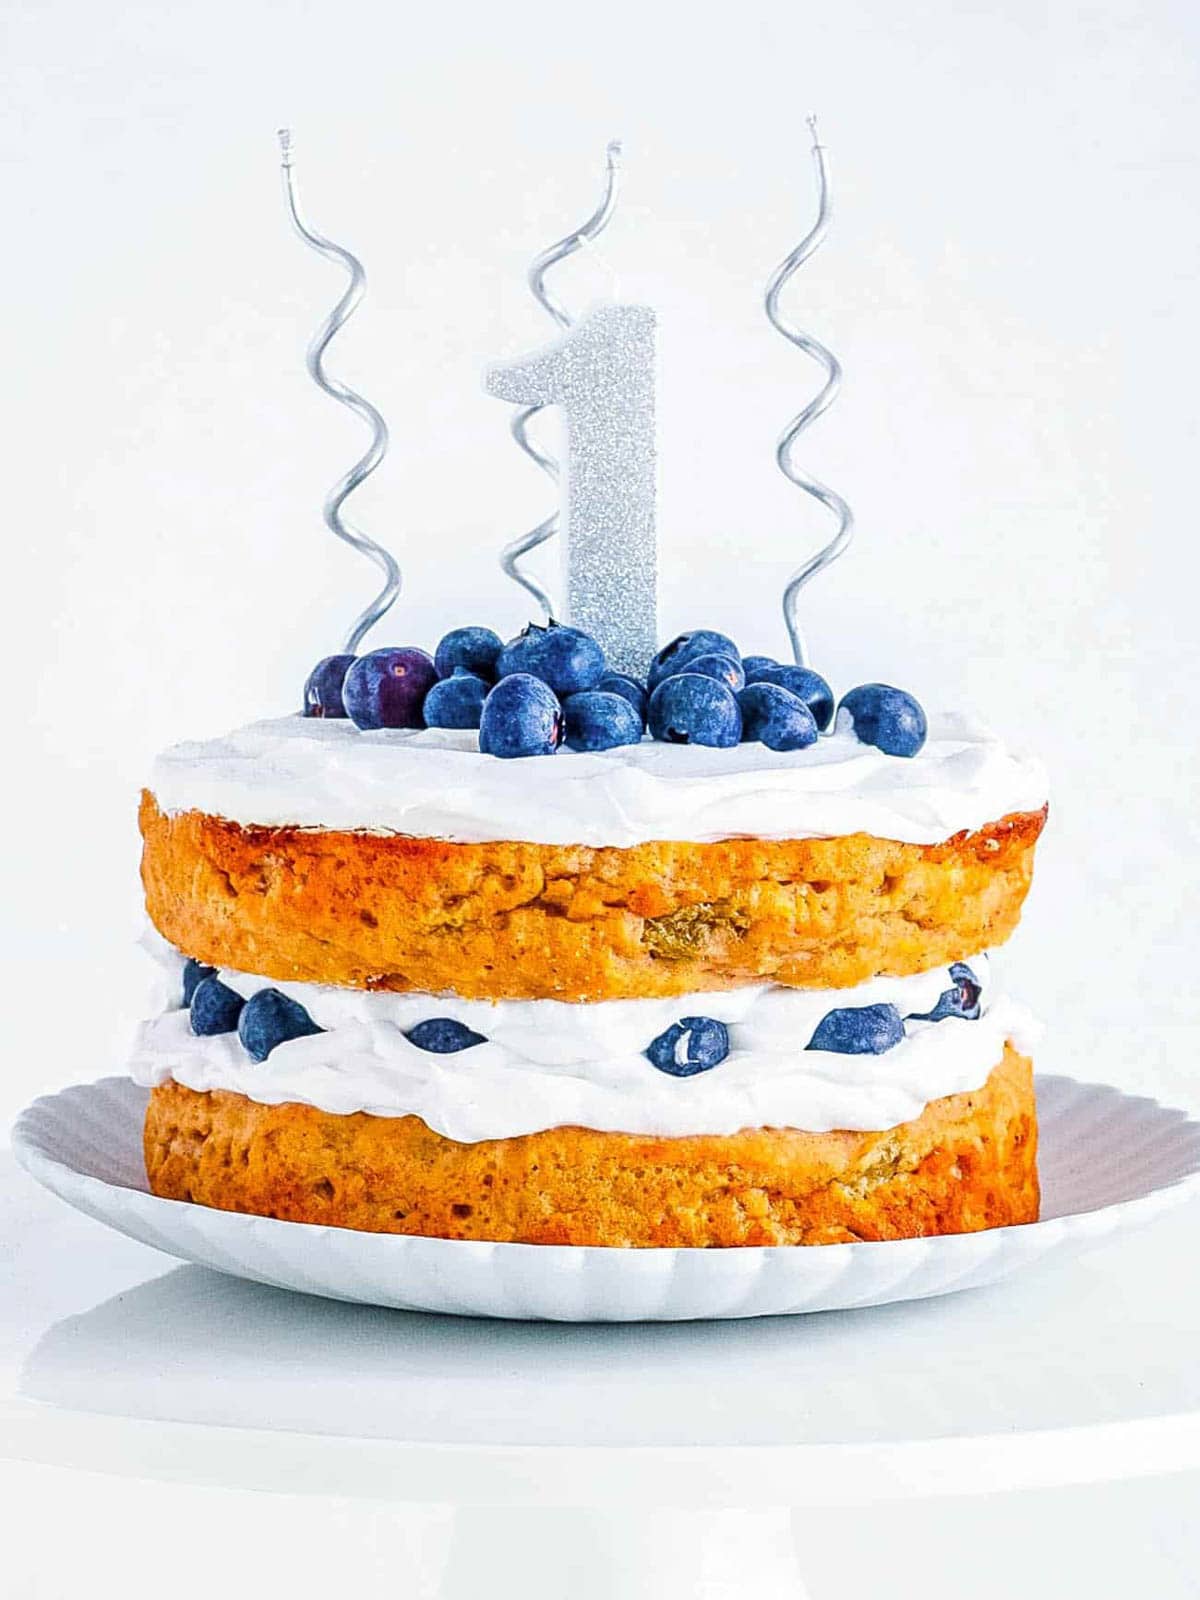 Healthy smash cake topped with blueberries and vegan frosting with 1st birthday decorations on top.